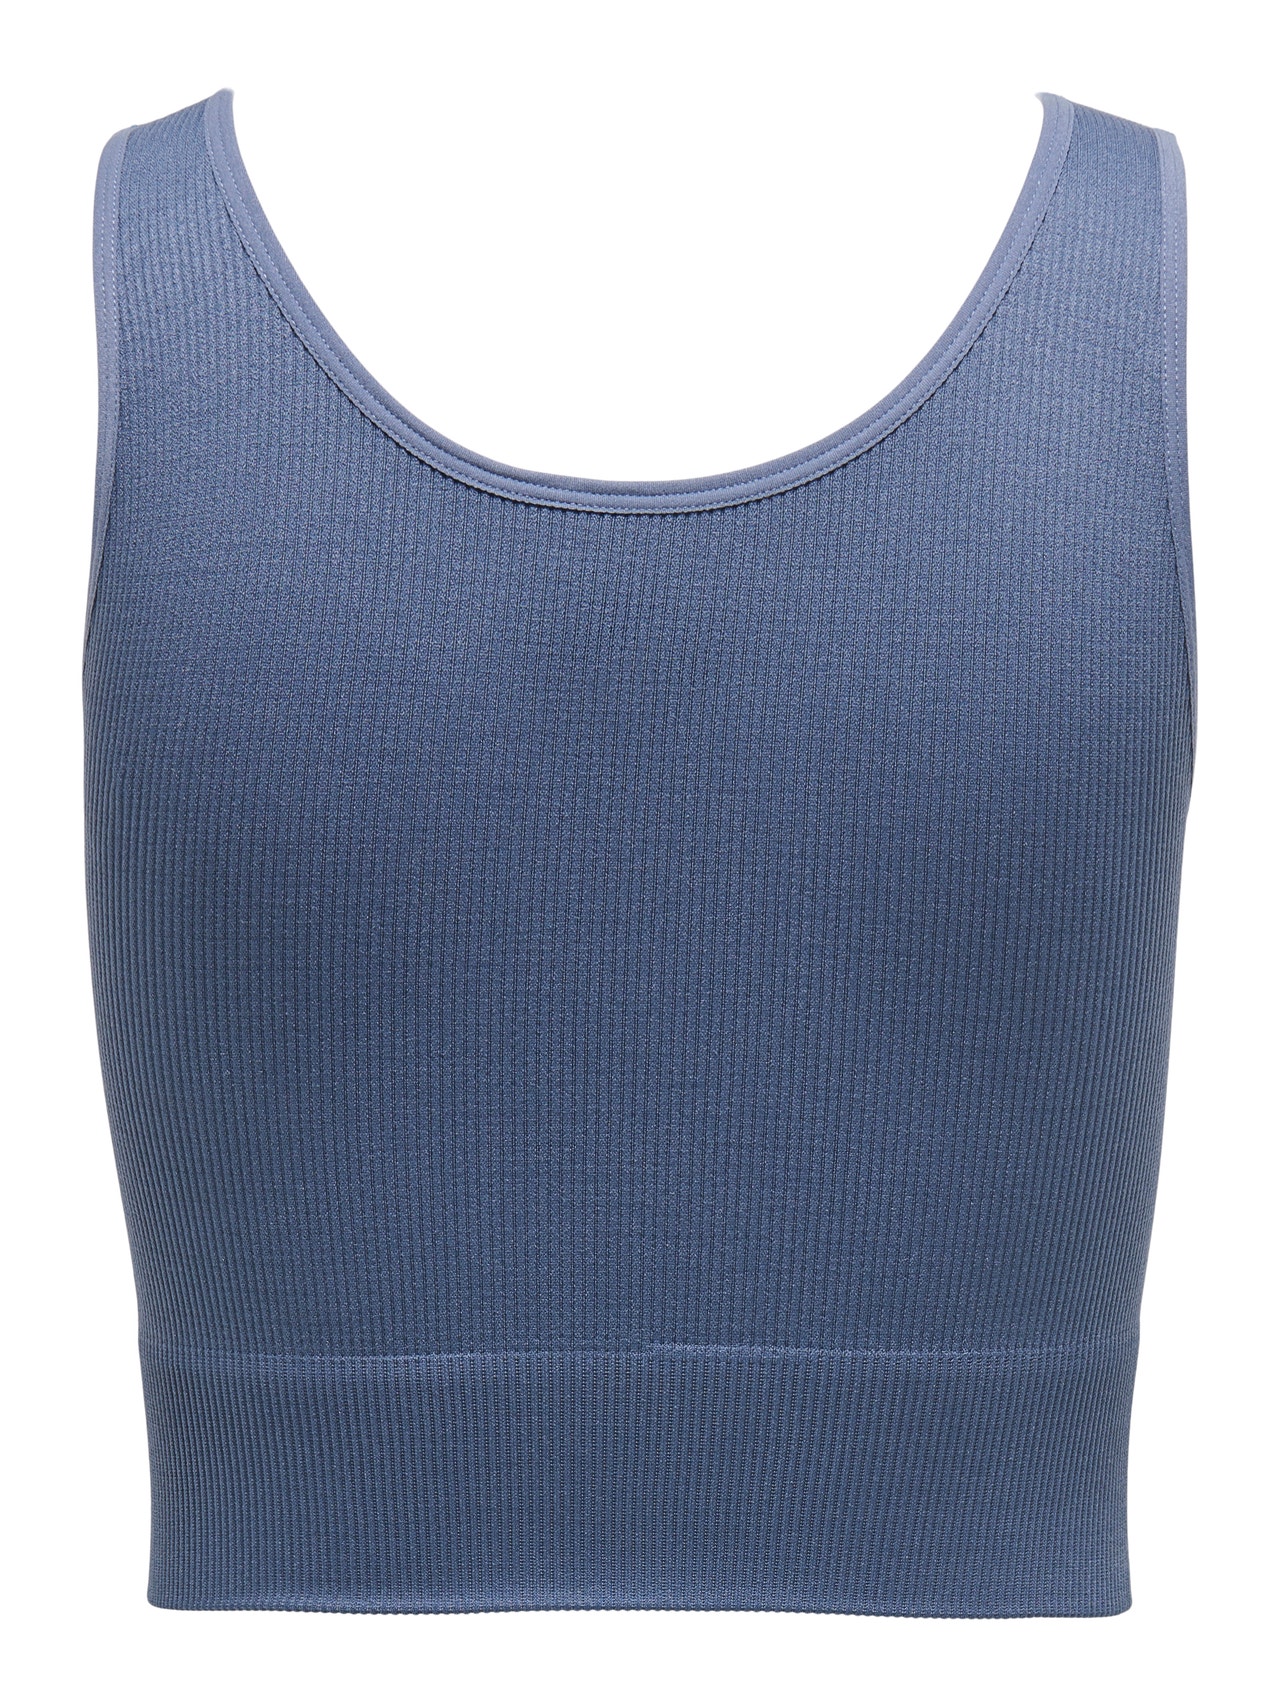 ONLY Seamless Cropped Training Top -Vintage Indigo - 15250051